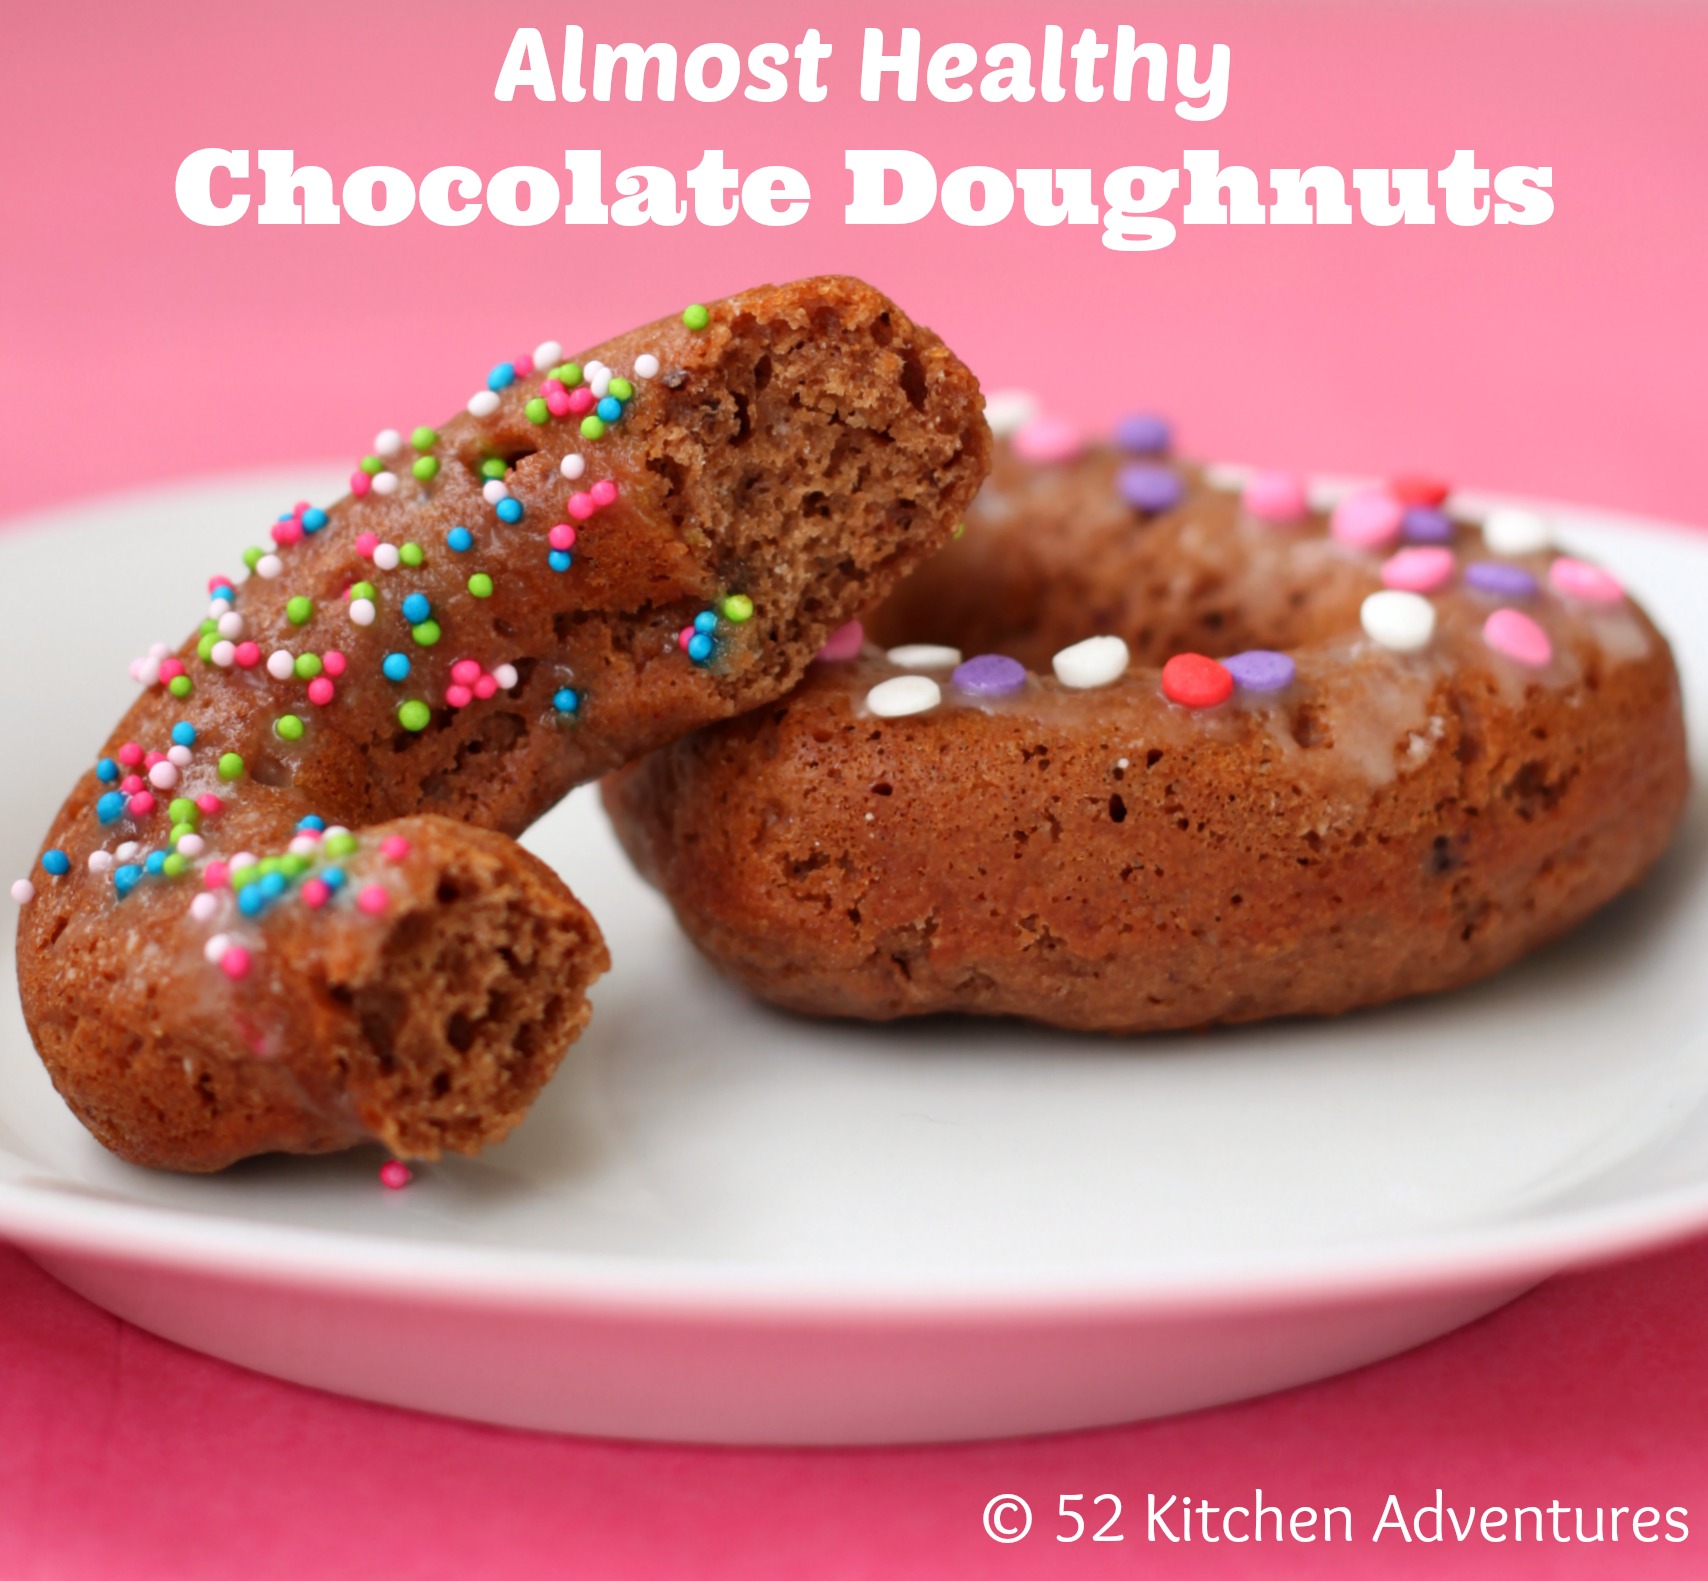 Almost Healthy Chocolate Doughnuts